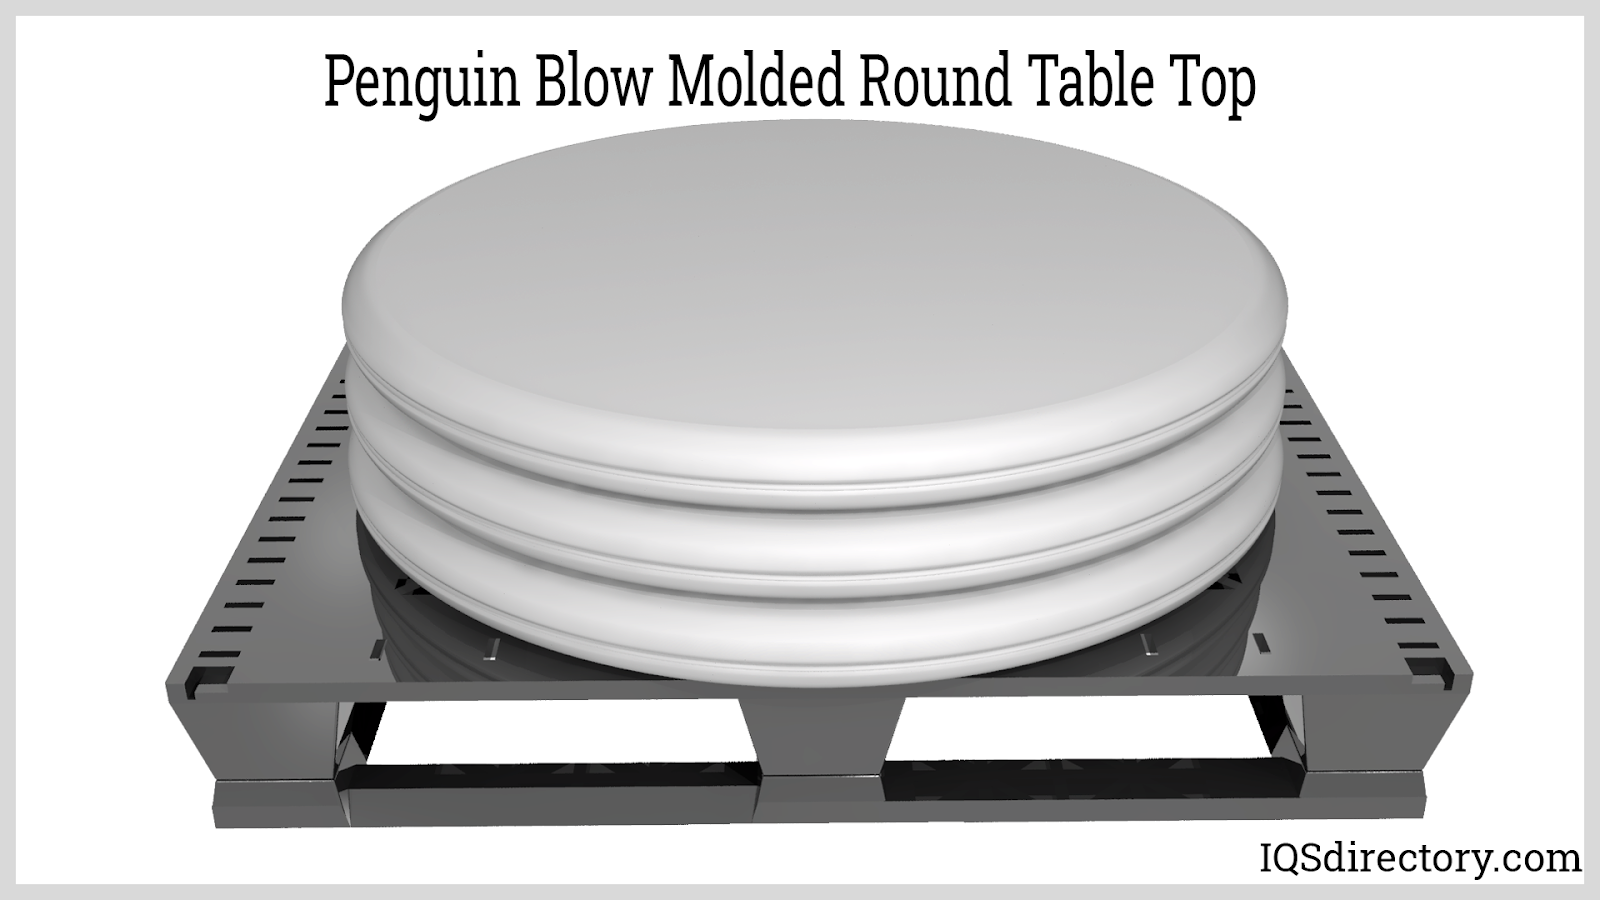 Penguin Blow Molded Round Table Top